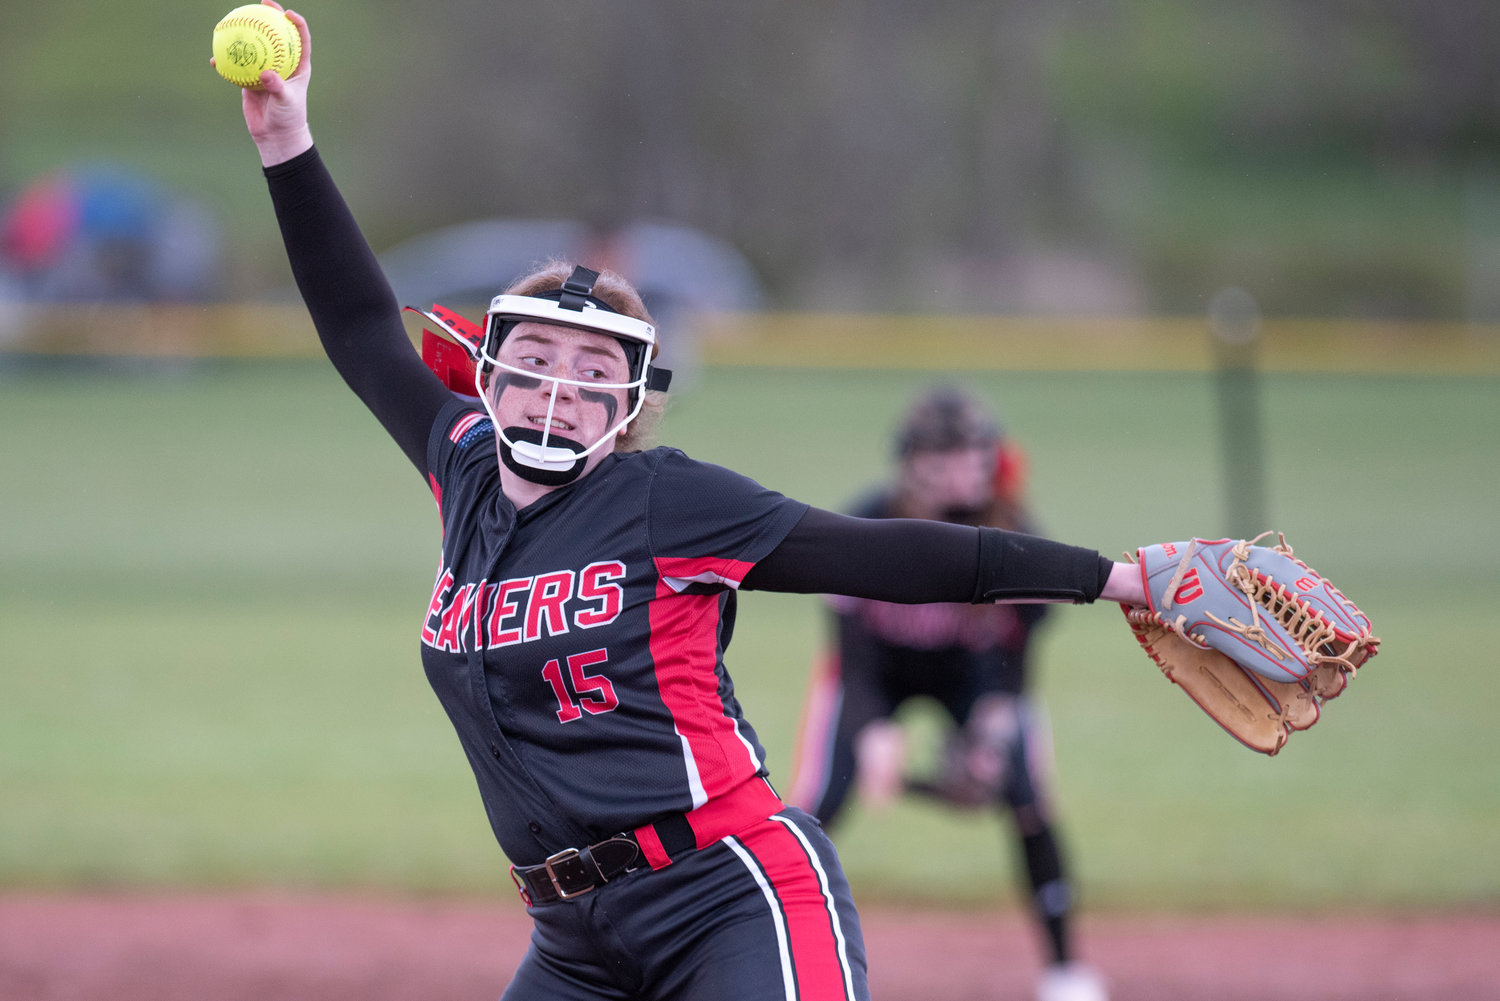 Tenino pitcher Emily Baxter winds up to deliver a pitch to an Elma batter during a league home game on April 26. Baxter was named to The Chronicle's All-Area Team for the 2022 season.